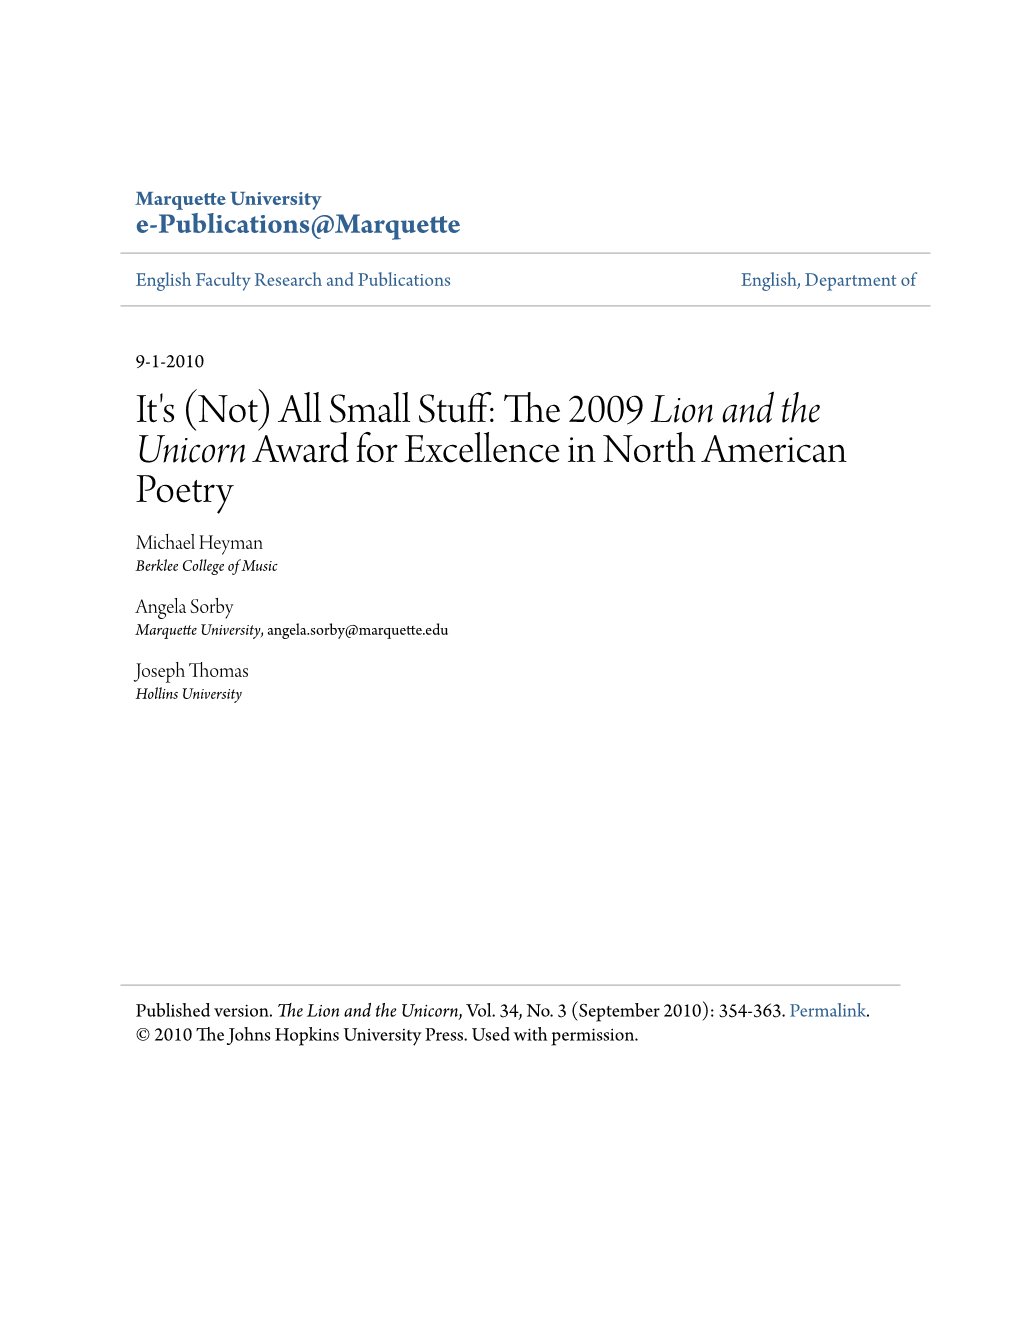 It's (Not) All Small Stuff: the 2009 Lion and the Unicorn Award for Excellence in North American Poetry Michael Heyman Berklee College of Music